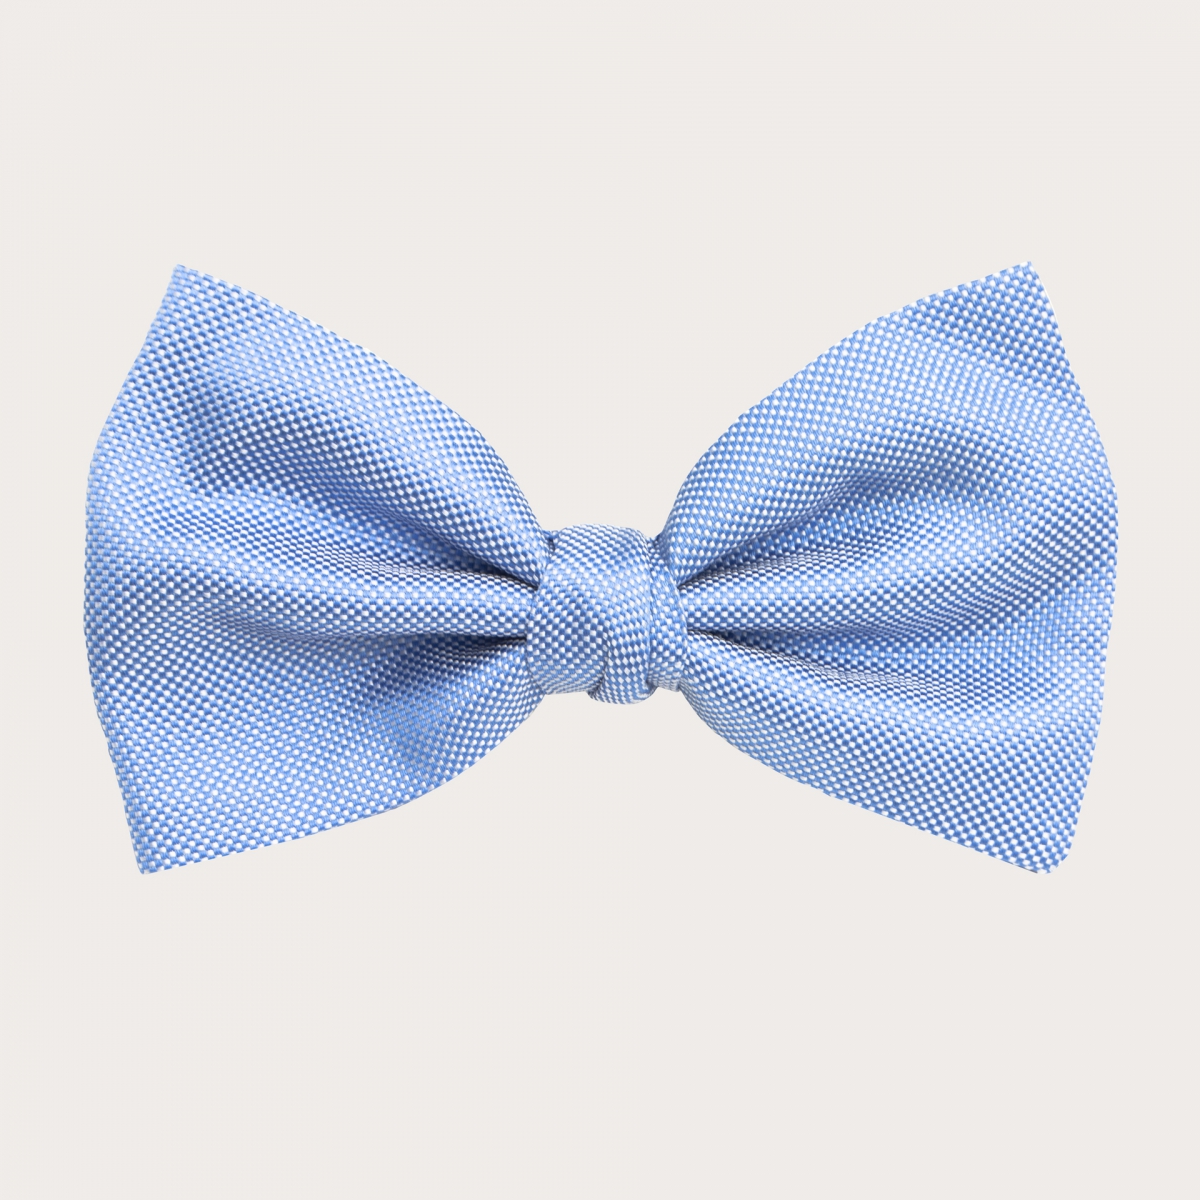 BRUCLE Elegant bow tie in jacquard silk, light blue and white pincushion